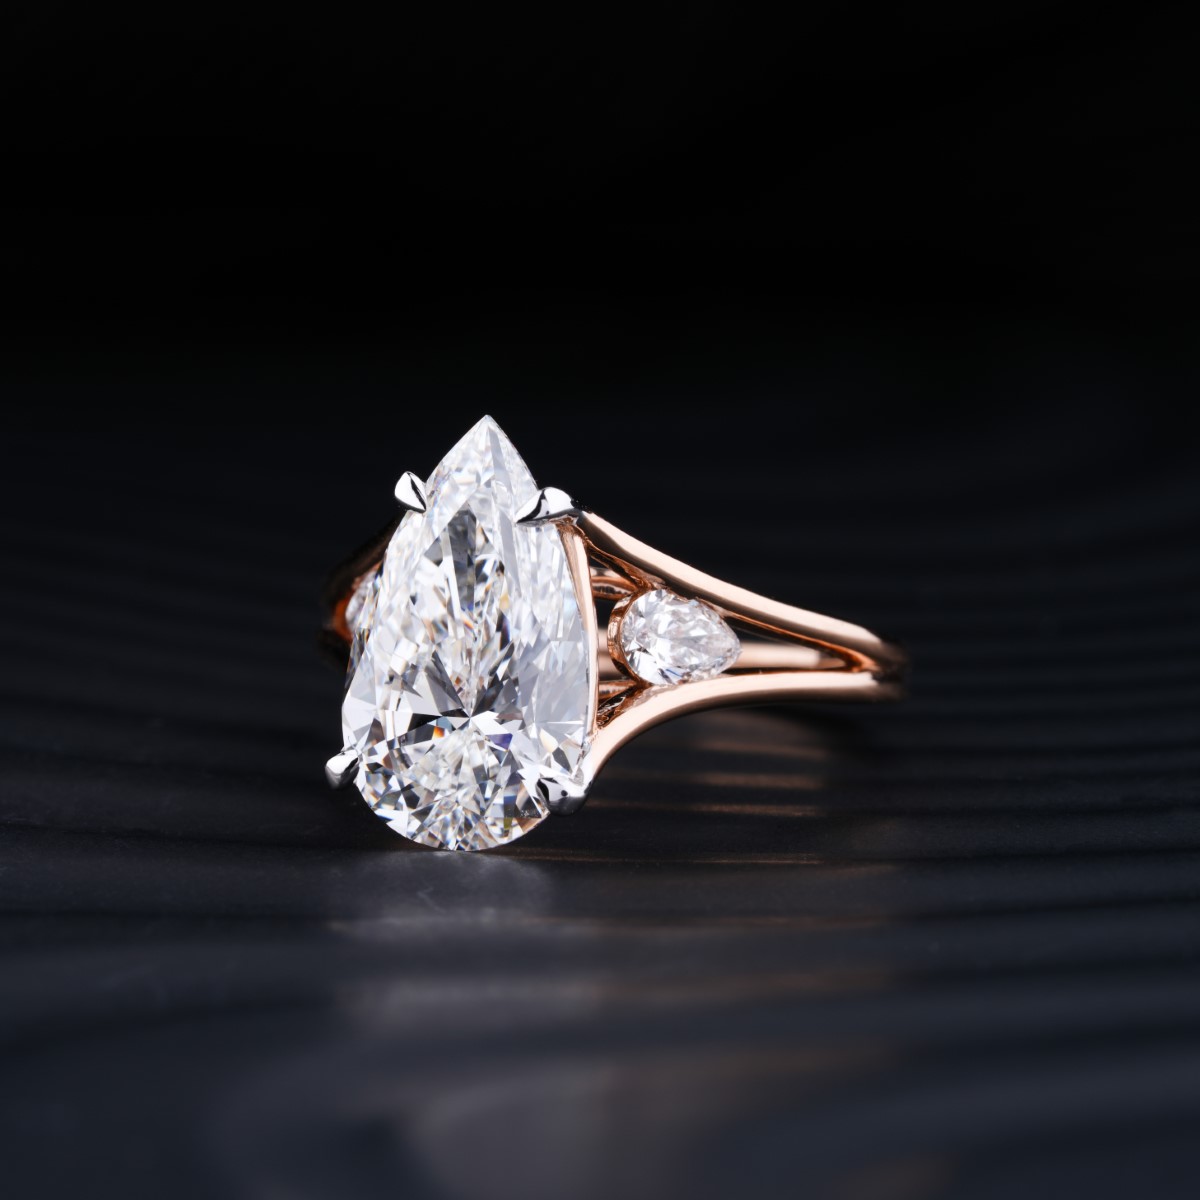 Fashion and Design Trends in lab grown diamond